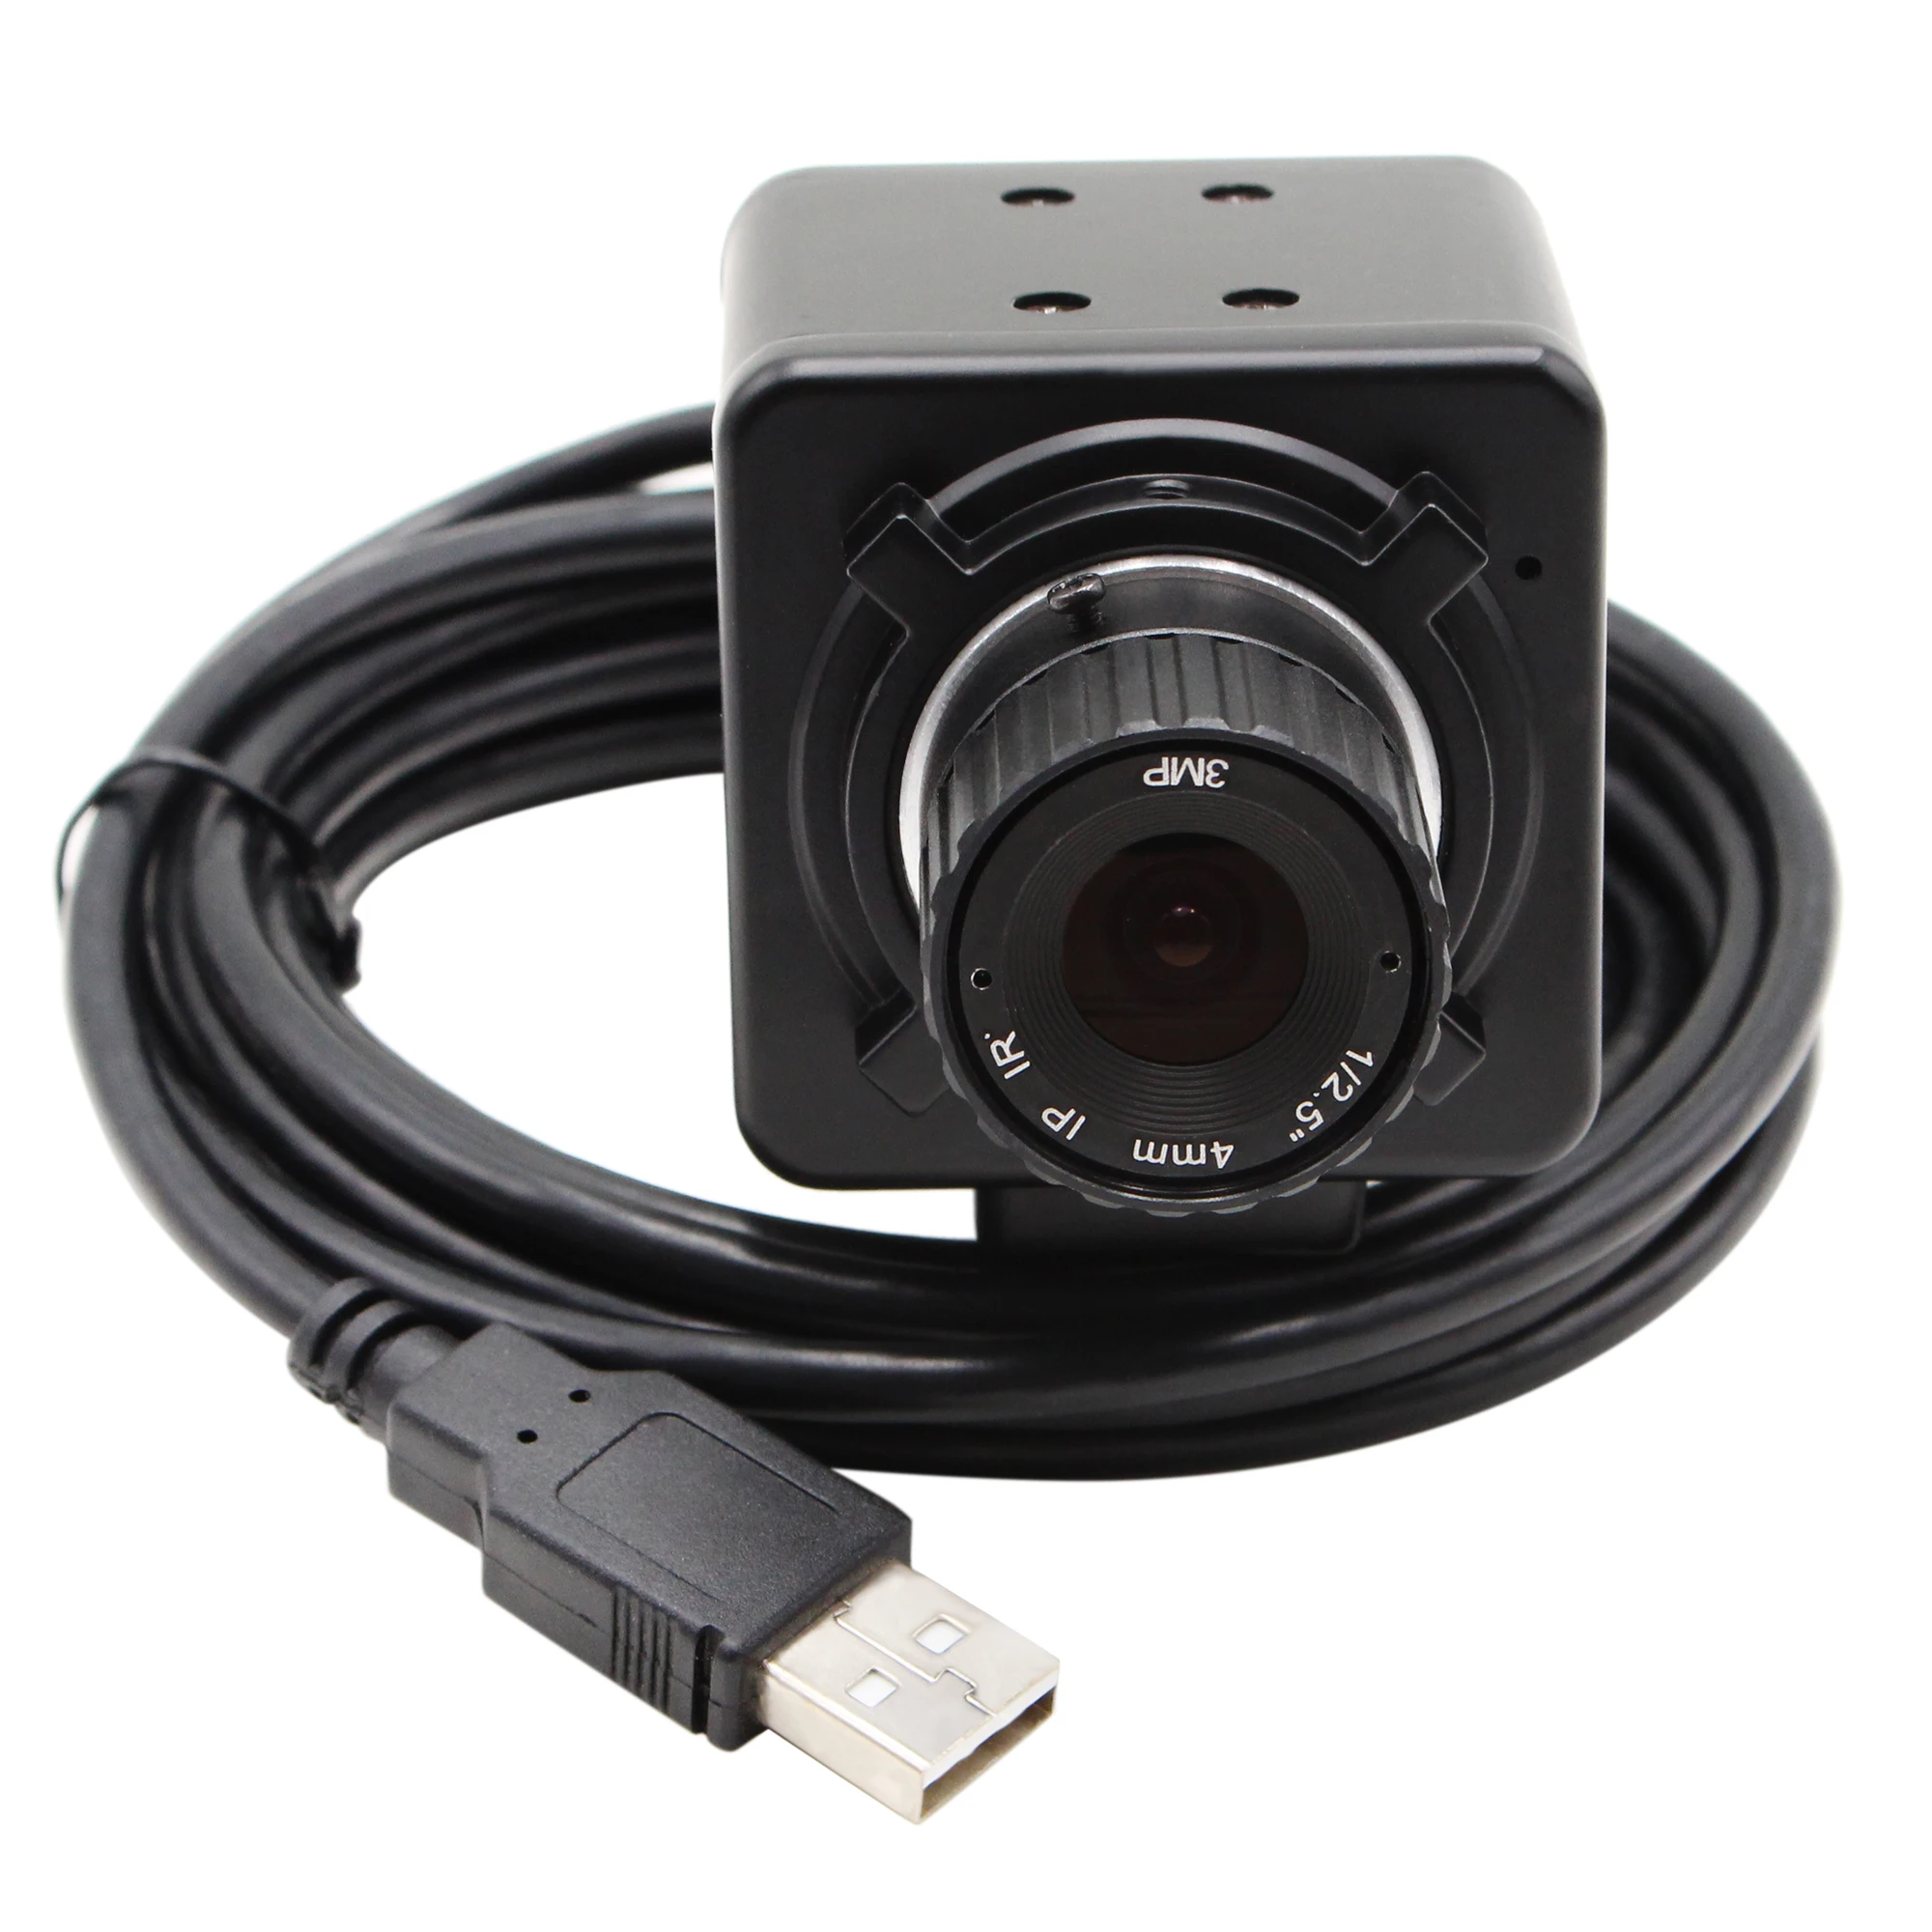 

2MP high speed 60fps 1080p, 120fps 720p ,260fps 360P Mini webcam usb camera with 4/6/8mm CS lens for Android Linux Windows MAC